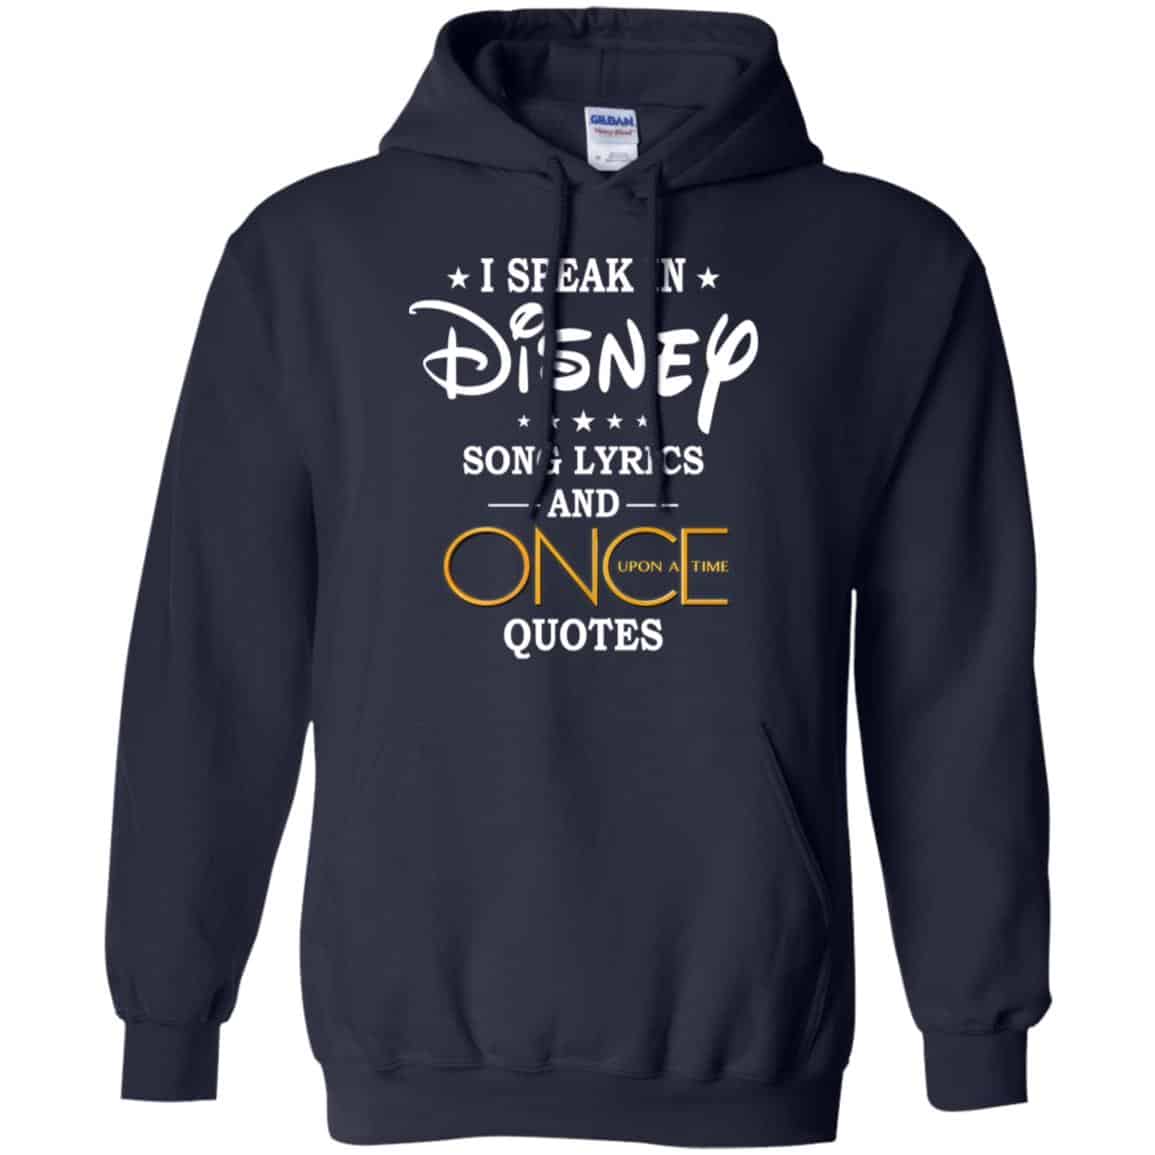 I Speak In Disney Song Lyrics And Once Upon A Time Quotes Shirt Hoodie Tank 0stees